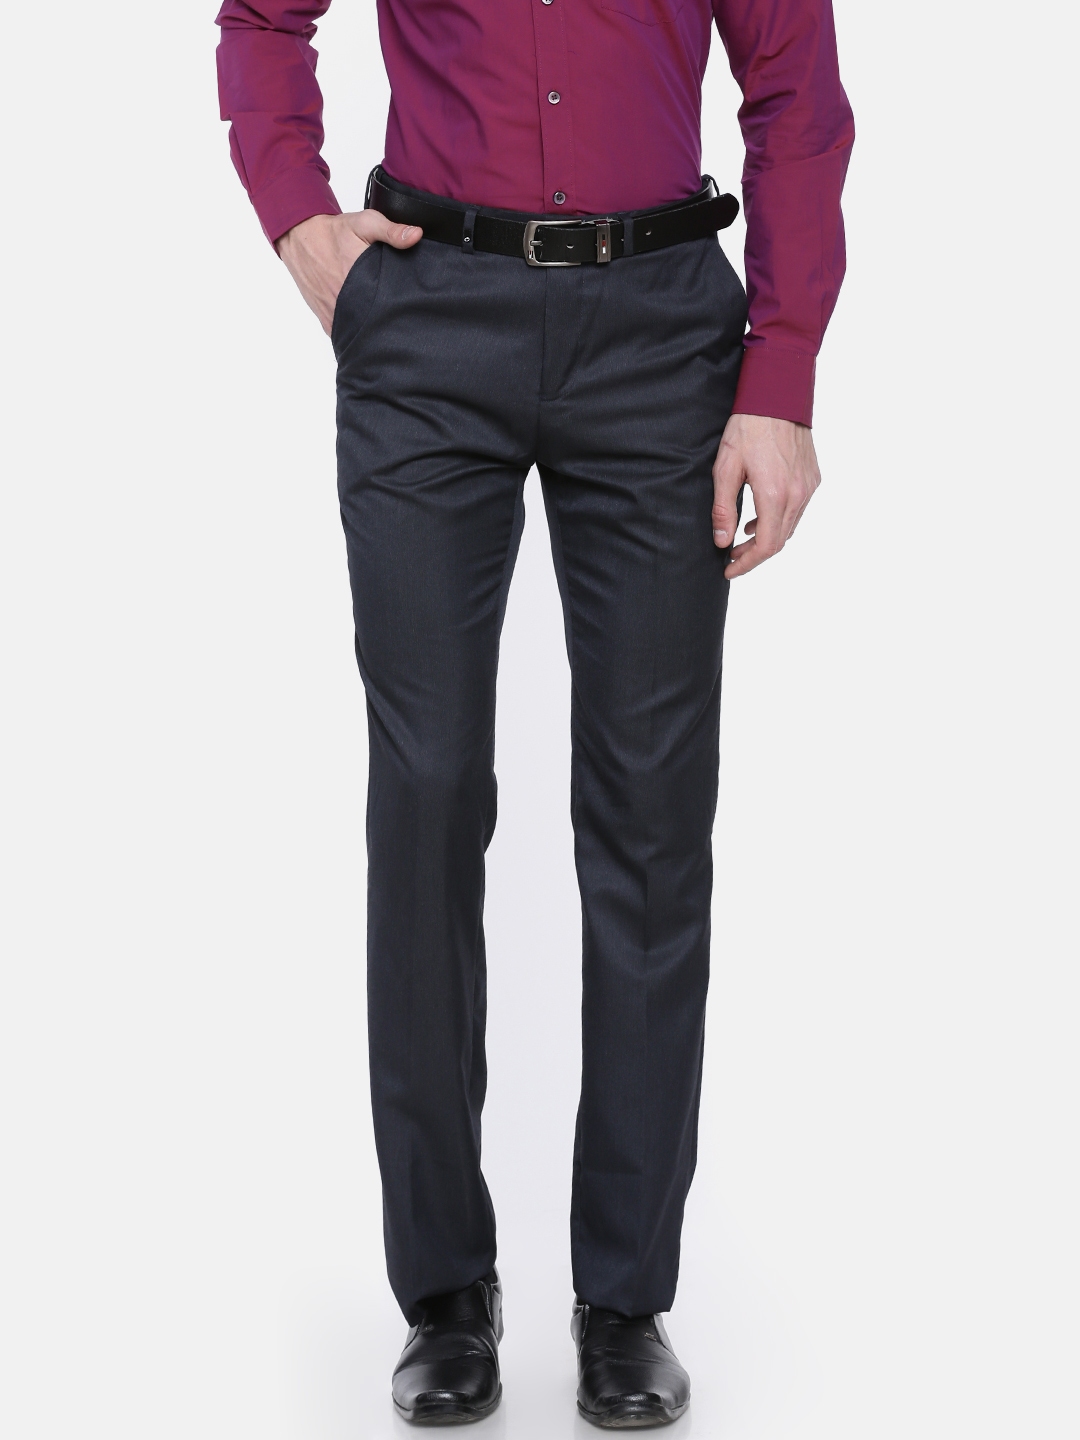 Oxemberg Trousers  Buy Oxemberg Pants  Trouser Online in India